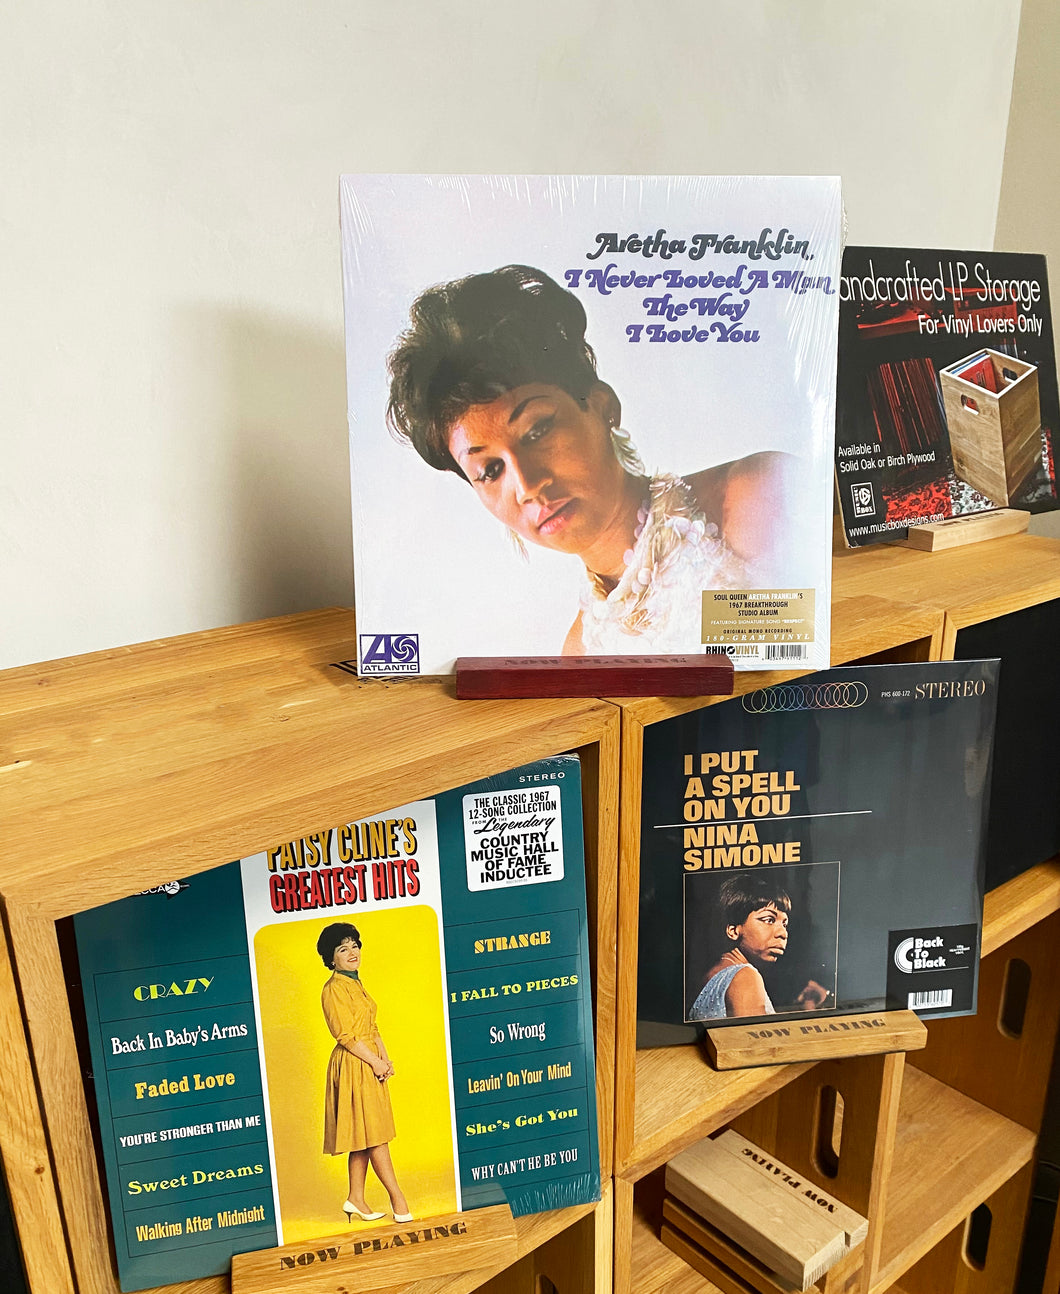 Curated Vinyl Record Storage- 'Honey Drippers' Female Vocalists Vinyl